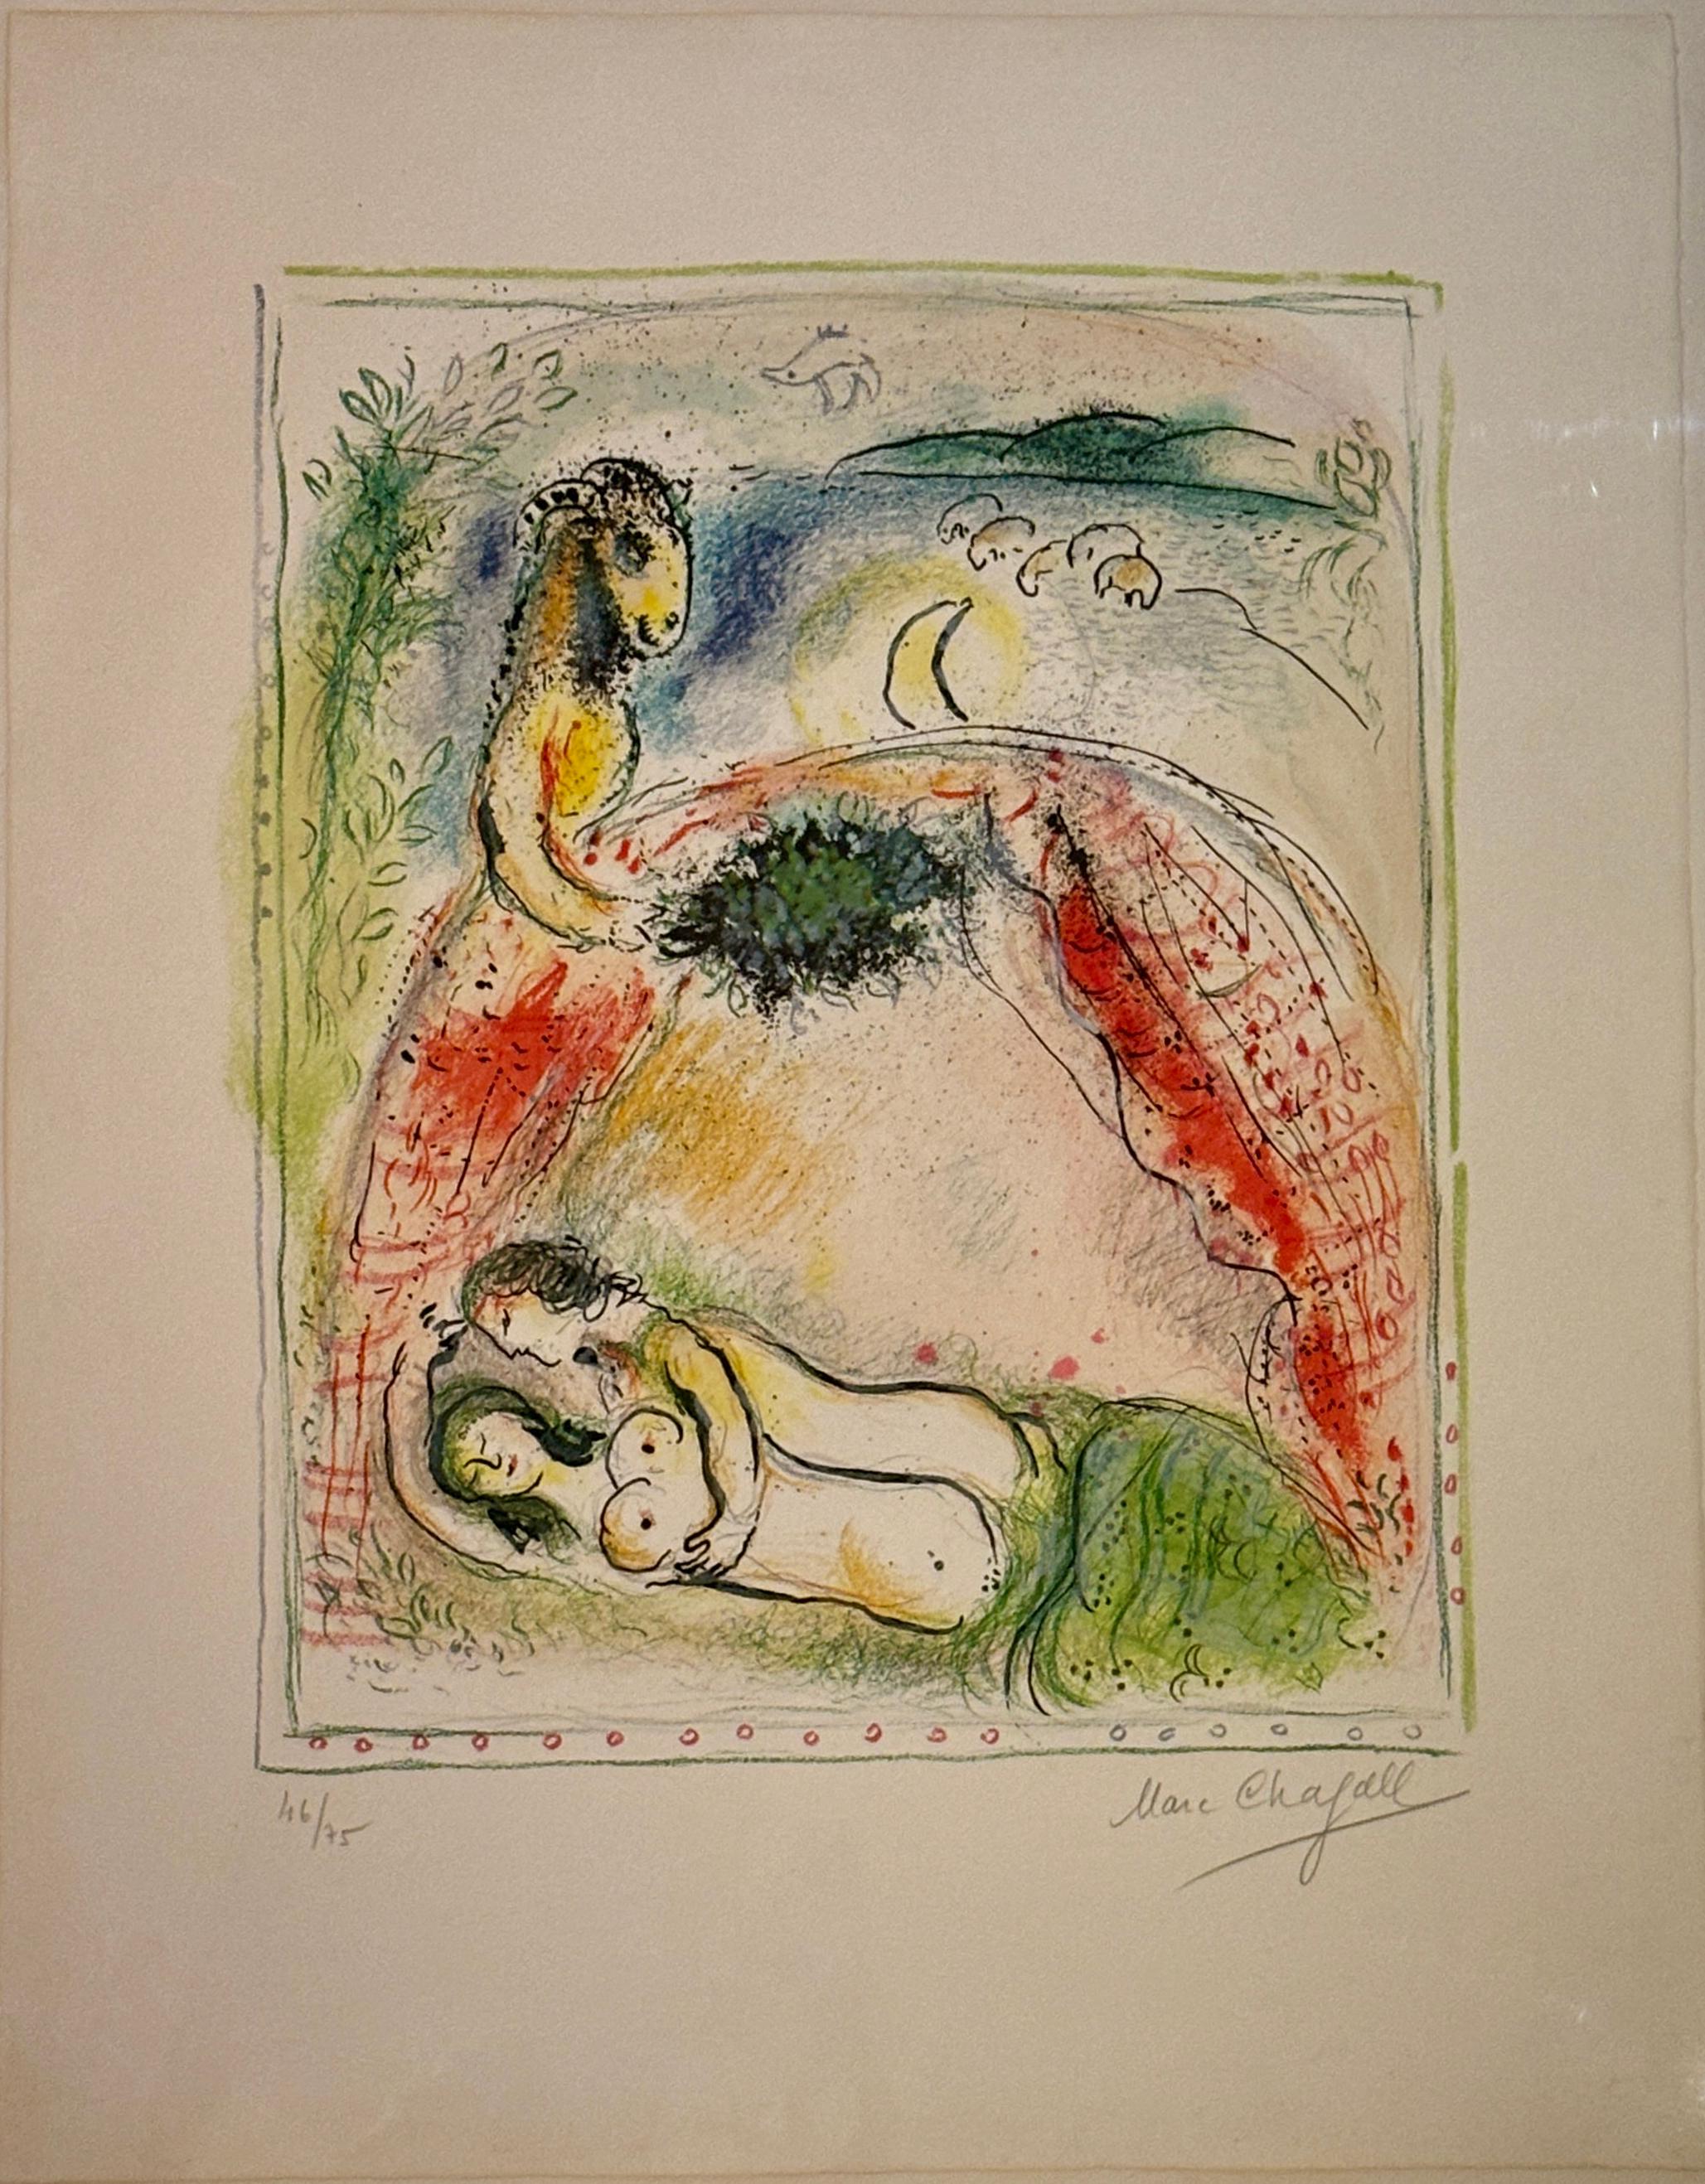 What is Marc Chagall most known for?